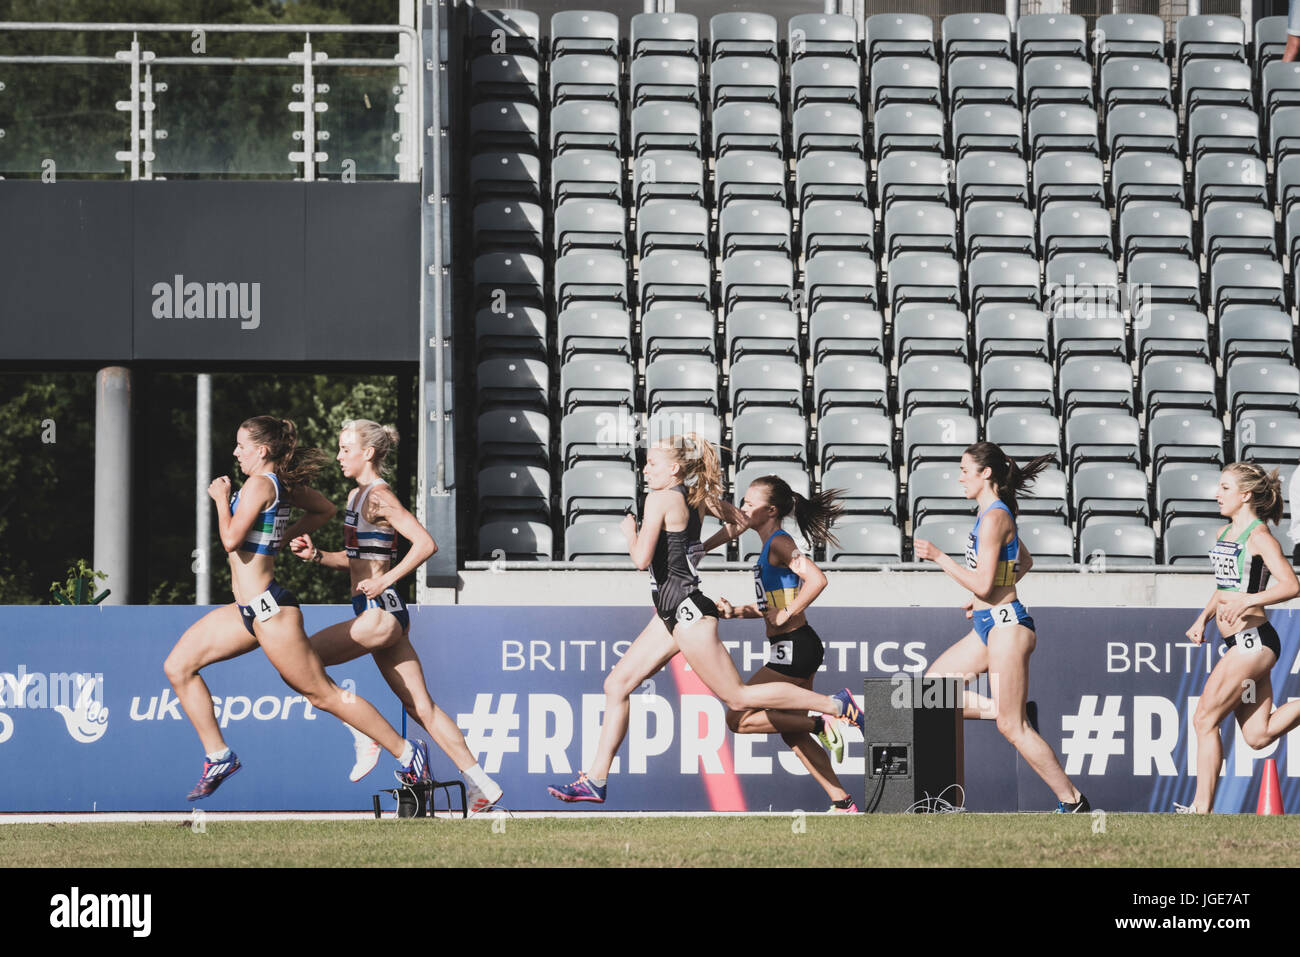 The women's 800m at the British Athletics Championships and World Trials at the Alexander Stadium, Birmingham, United Kingdom on 1-2 July 2017 Stock Photo